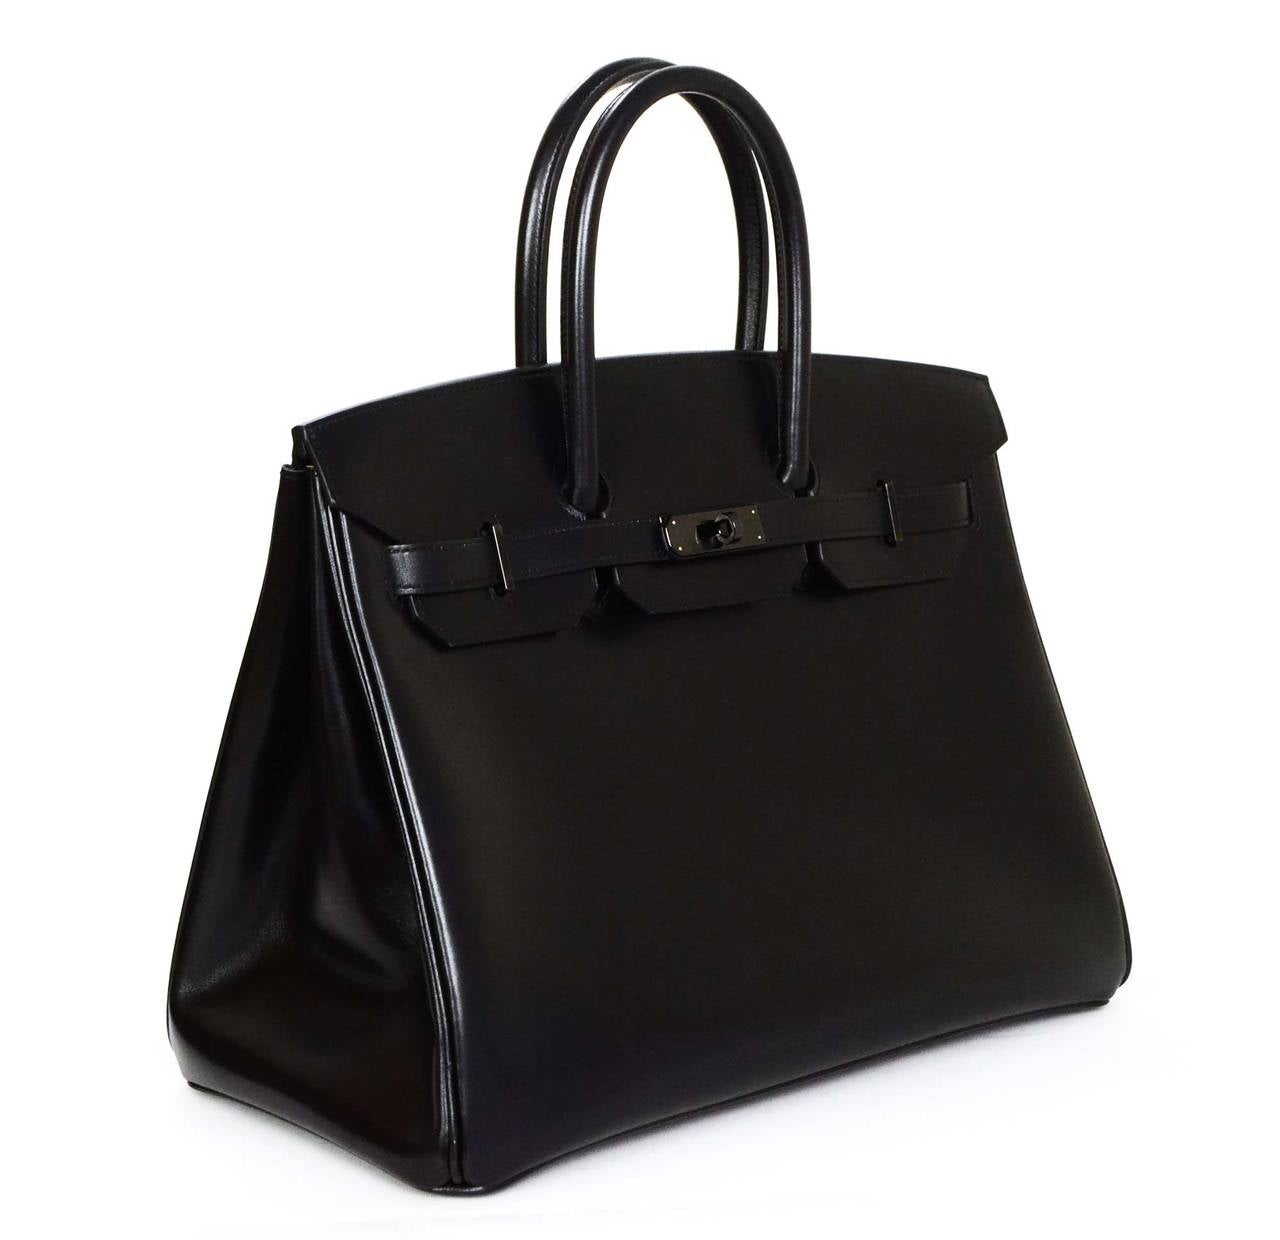 Hermes Rare Black Box Leather SO BLACK 35 cm Birkin Bag

    Made in: France
    Year of Production: 2011
    Color: Black
    Hardware: Black
    Materials: Box leather and metal
    Lining: Box leather
    Closure/opening: Top flap with